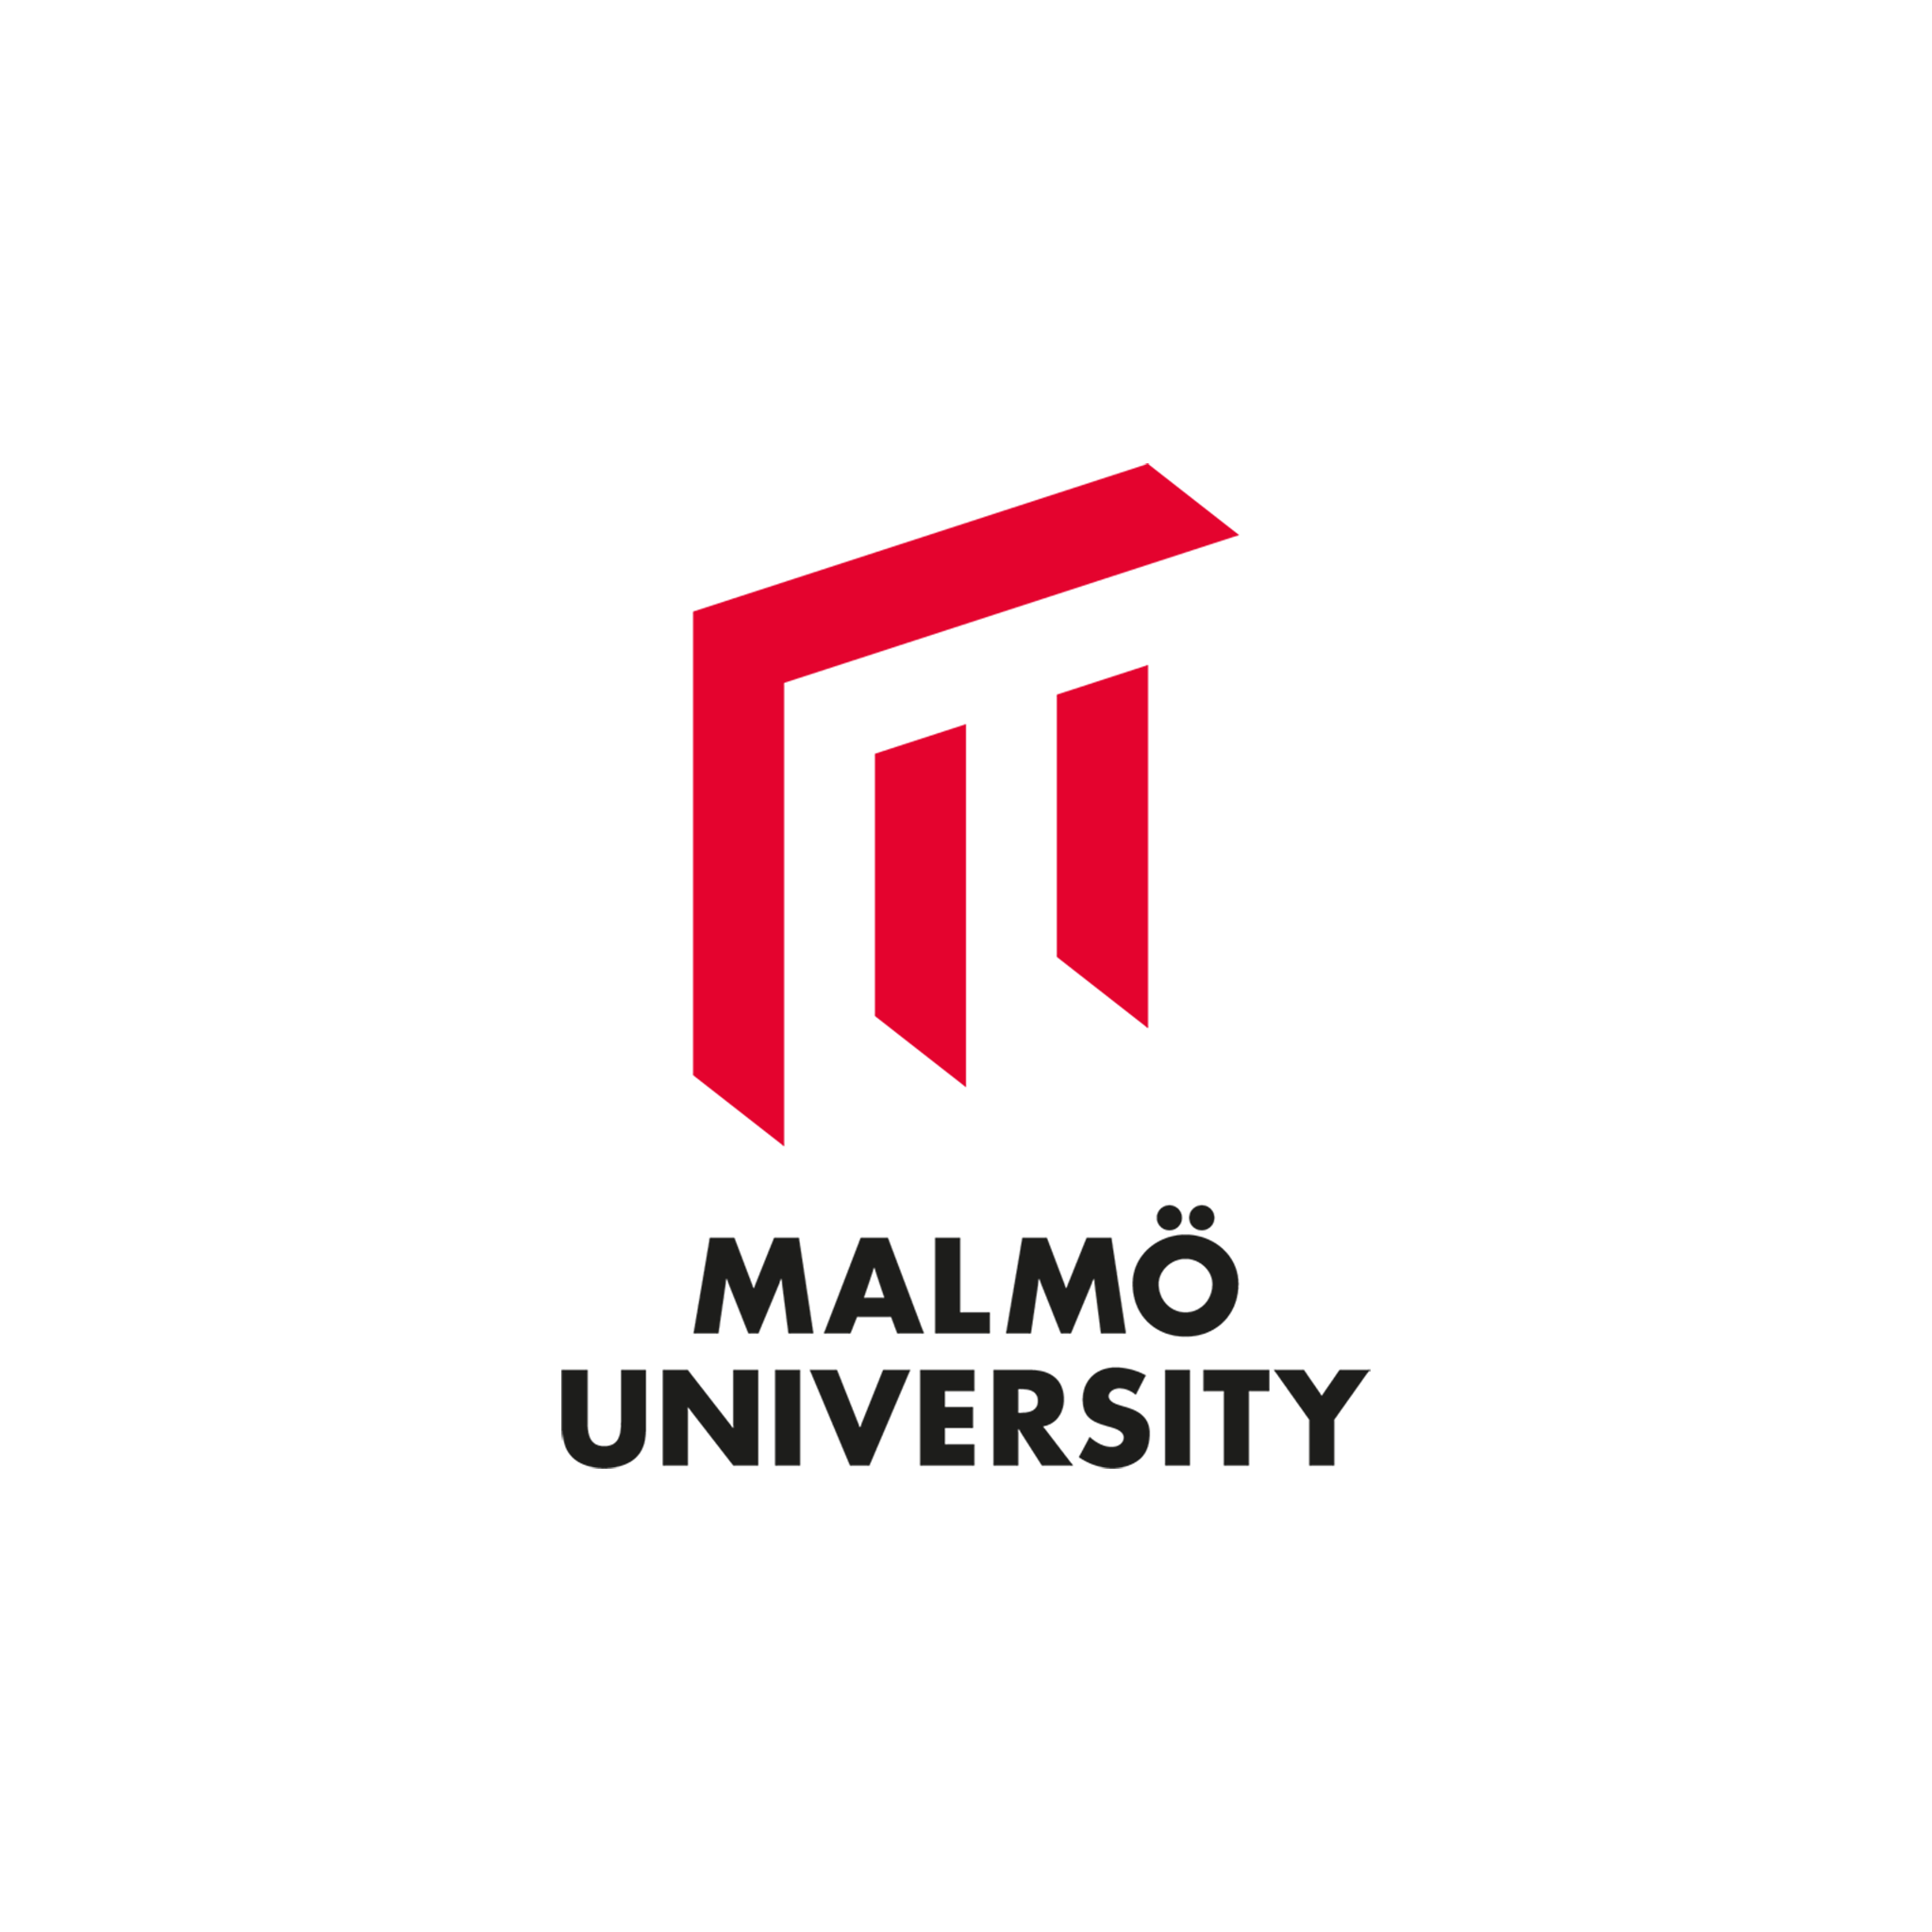 Malmö University logo in black and red